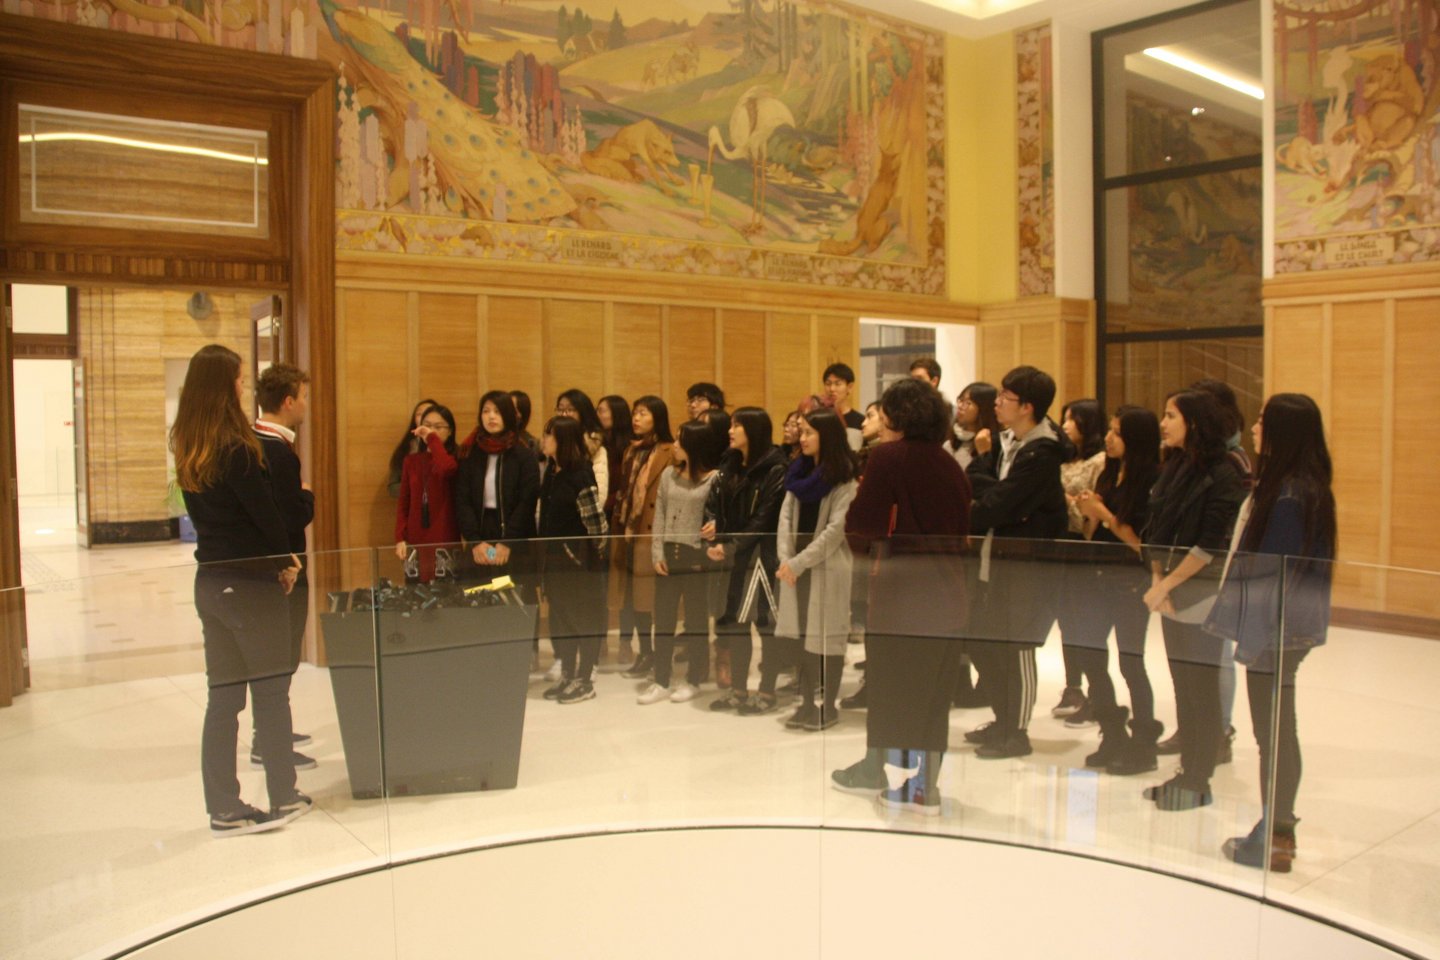 Students in the museum "The House of European History"